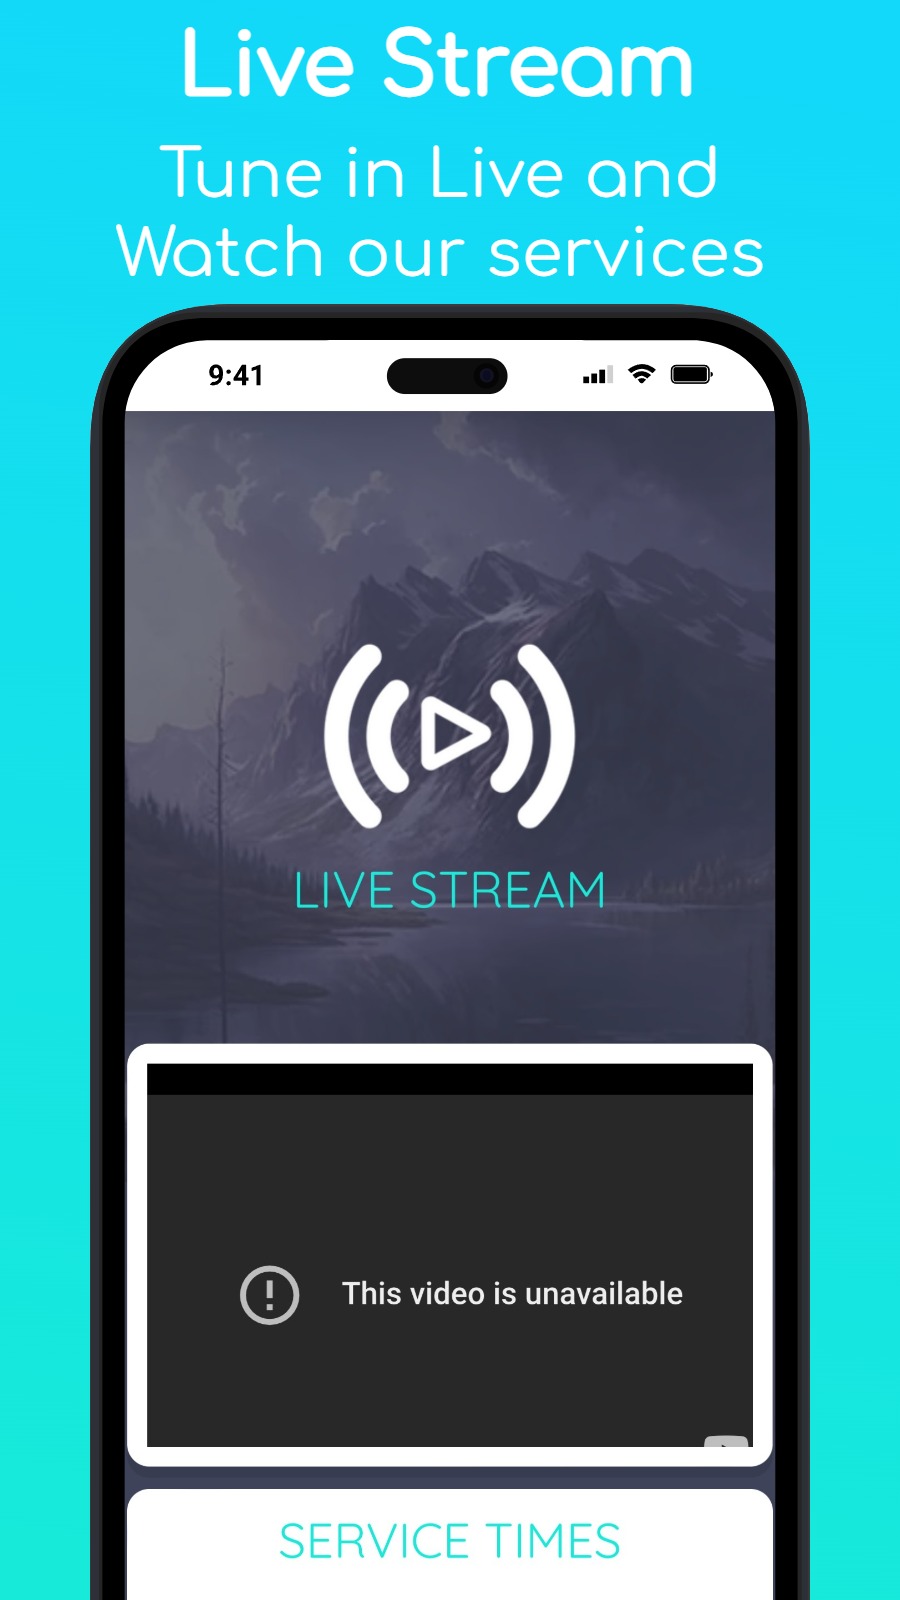 Live Stream - Tune in Live and Watch our services